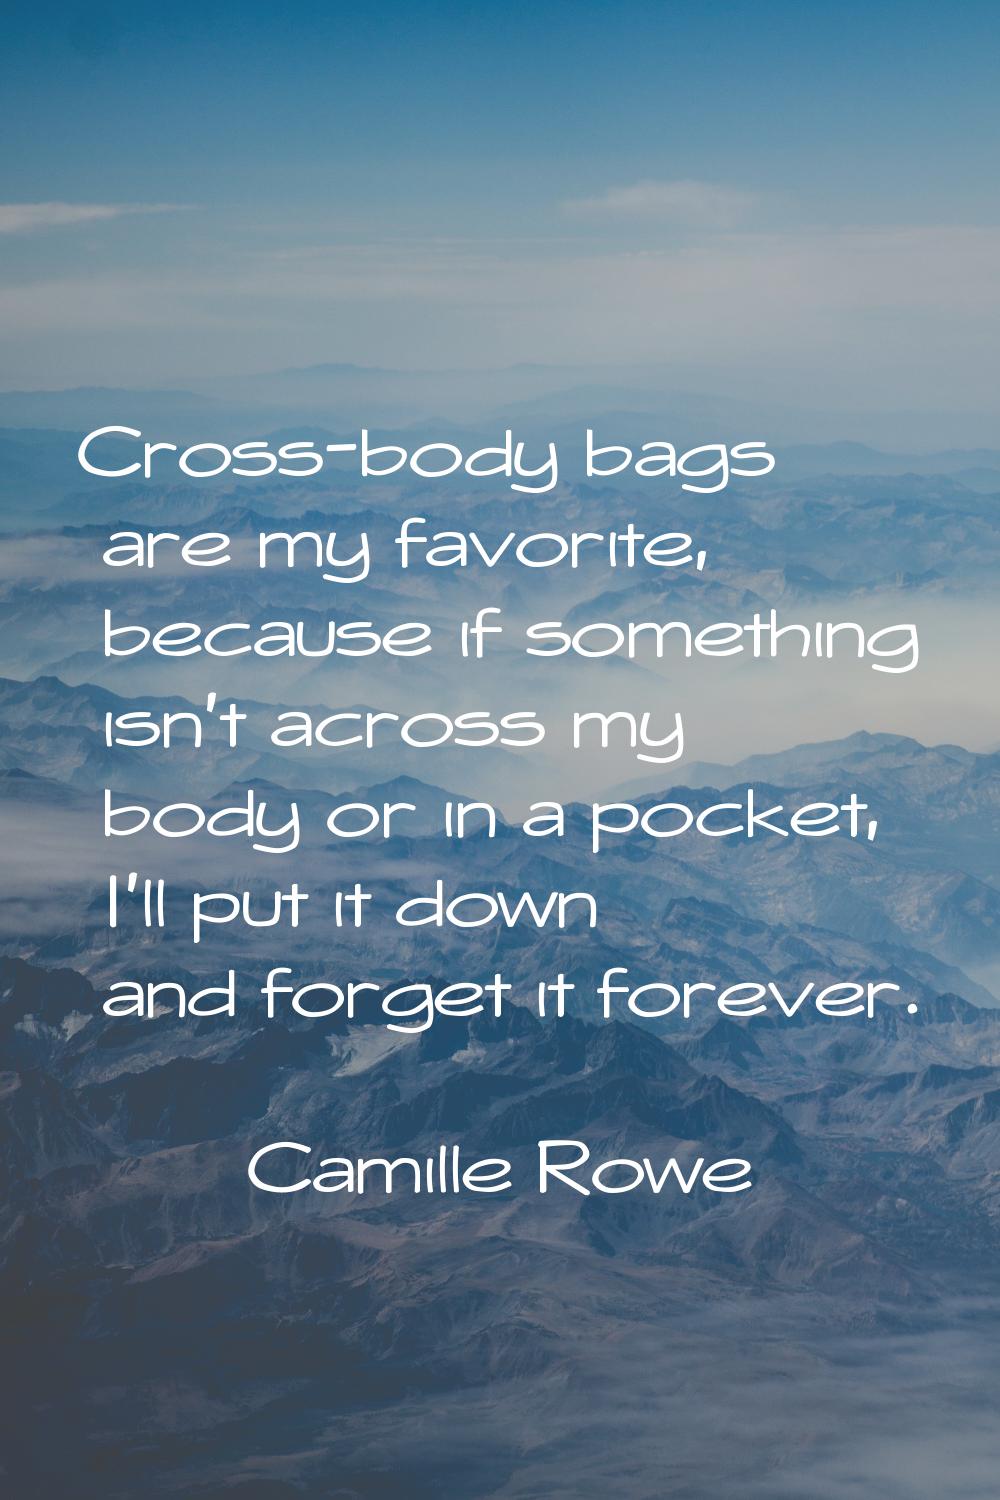 Cross-body bags are my favorite, because if something isn't across my body or in a pocket, I'll put